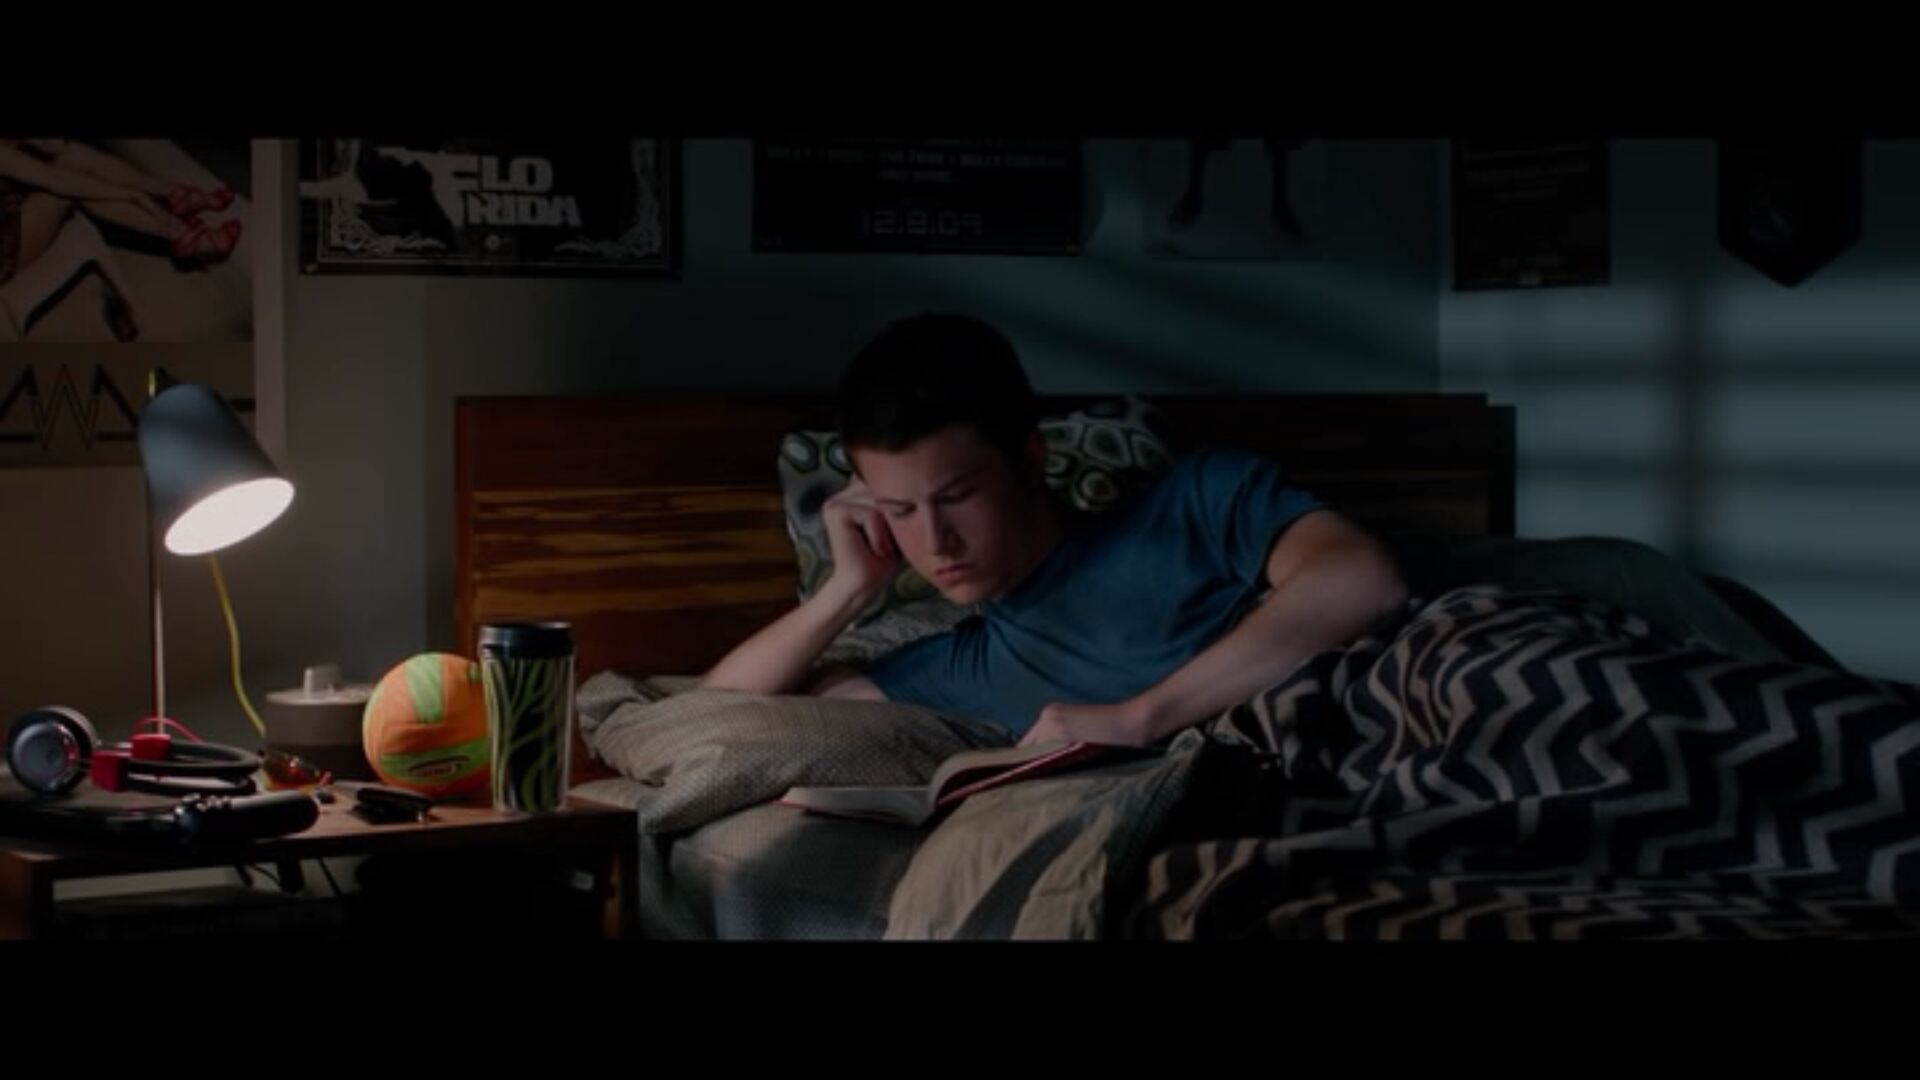 Dylan Minnette in Alexander and the Terrible, Horrible, No Good, Very Bad Day